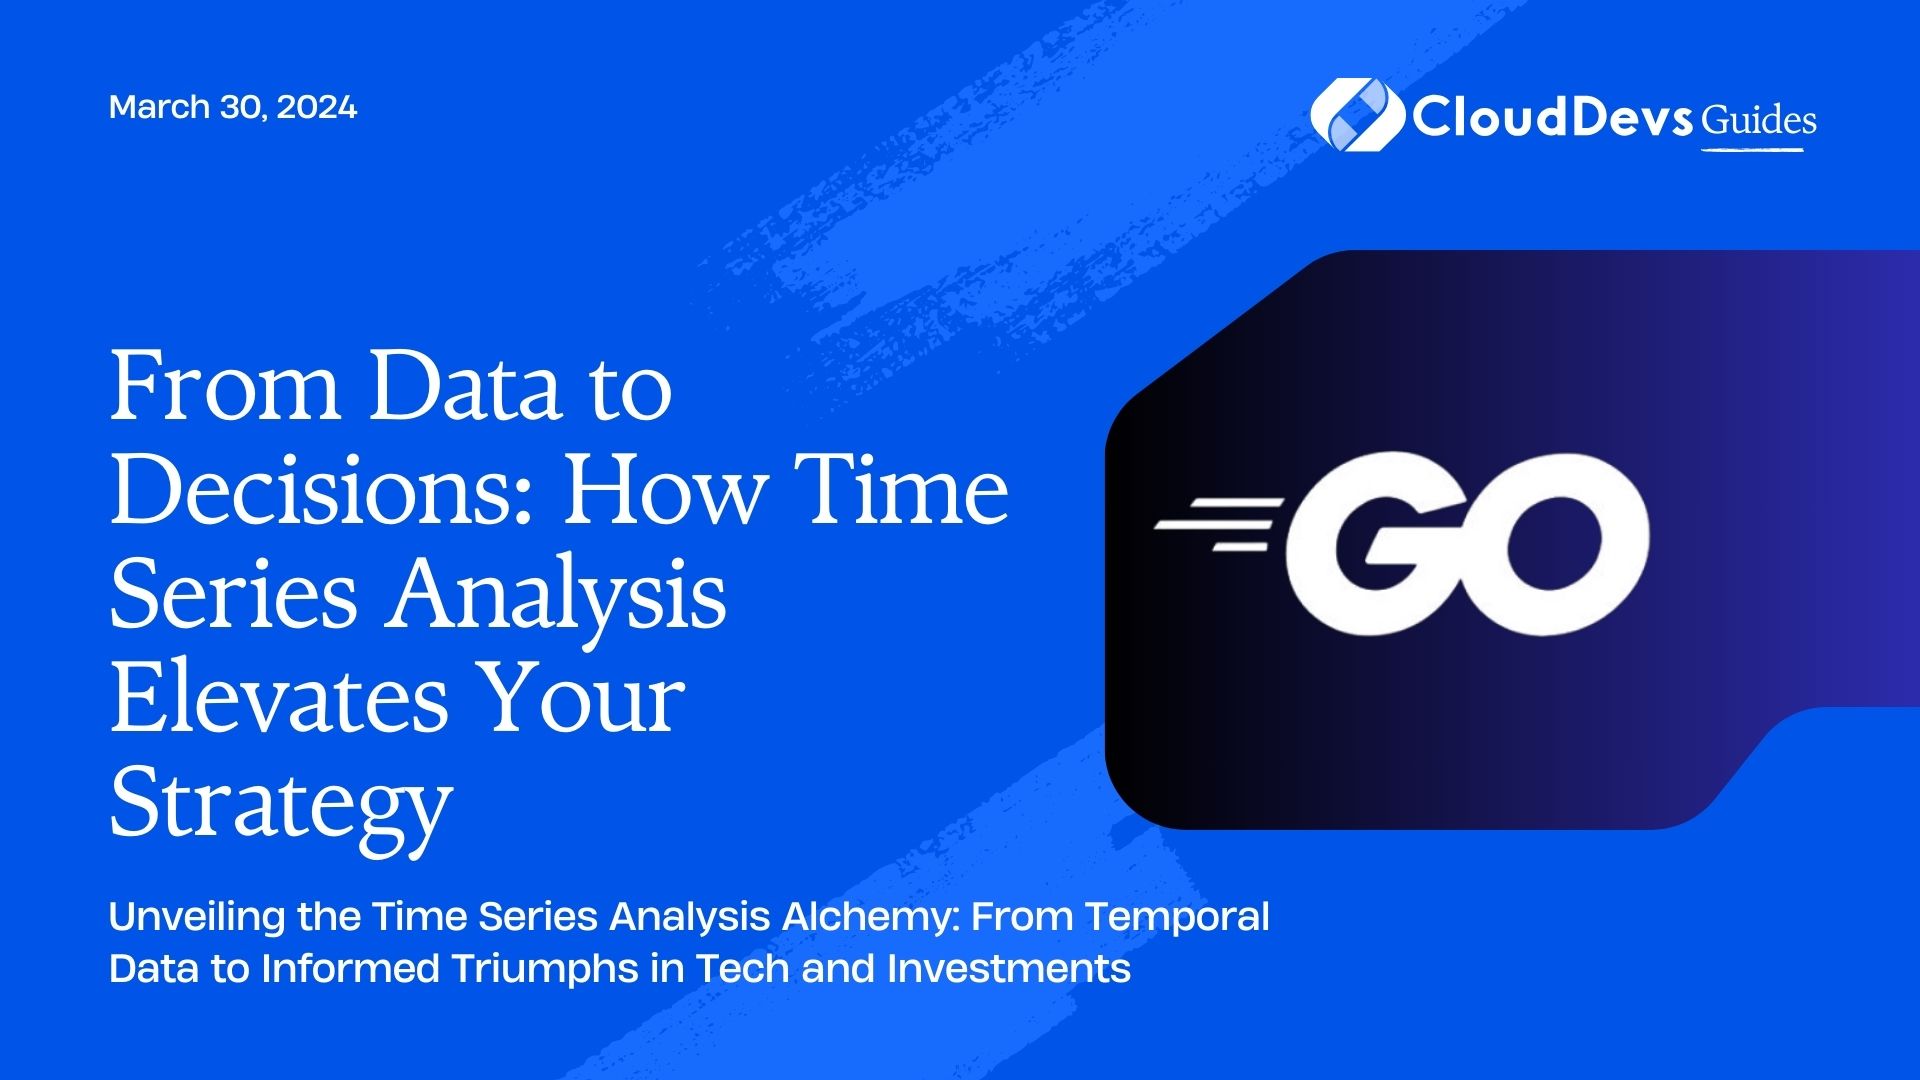 From Data to Decisions: How Time Series Analysis Elevates Your Strategy